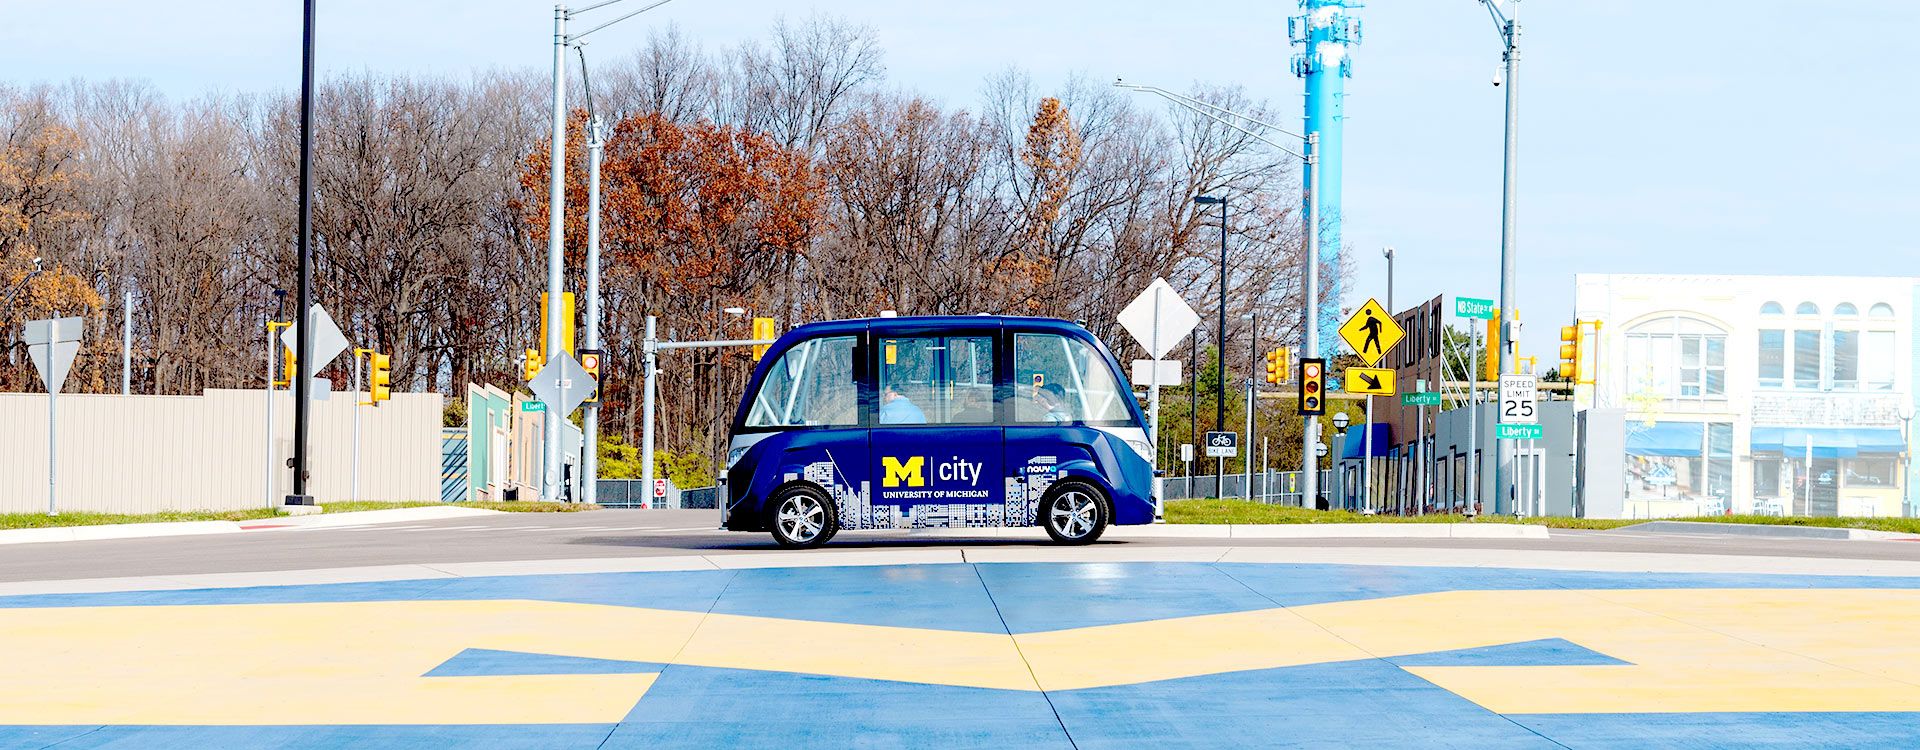 Automated vehicles roadside infrastructure